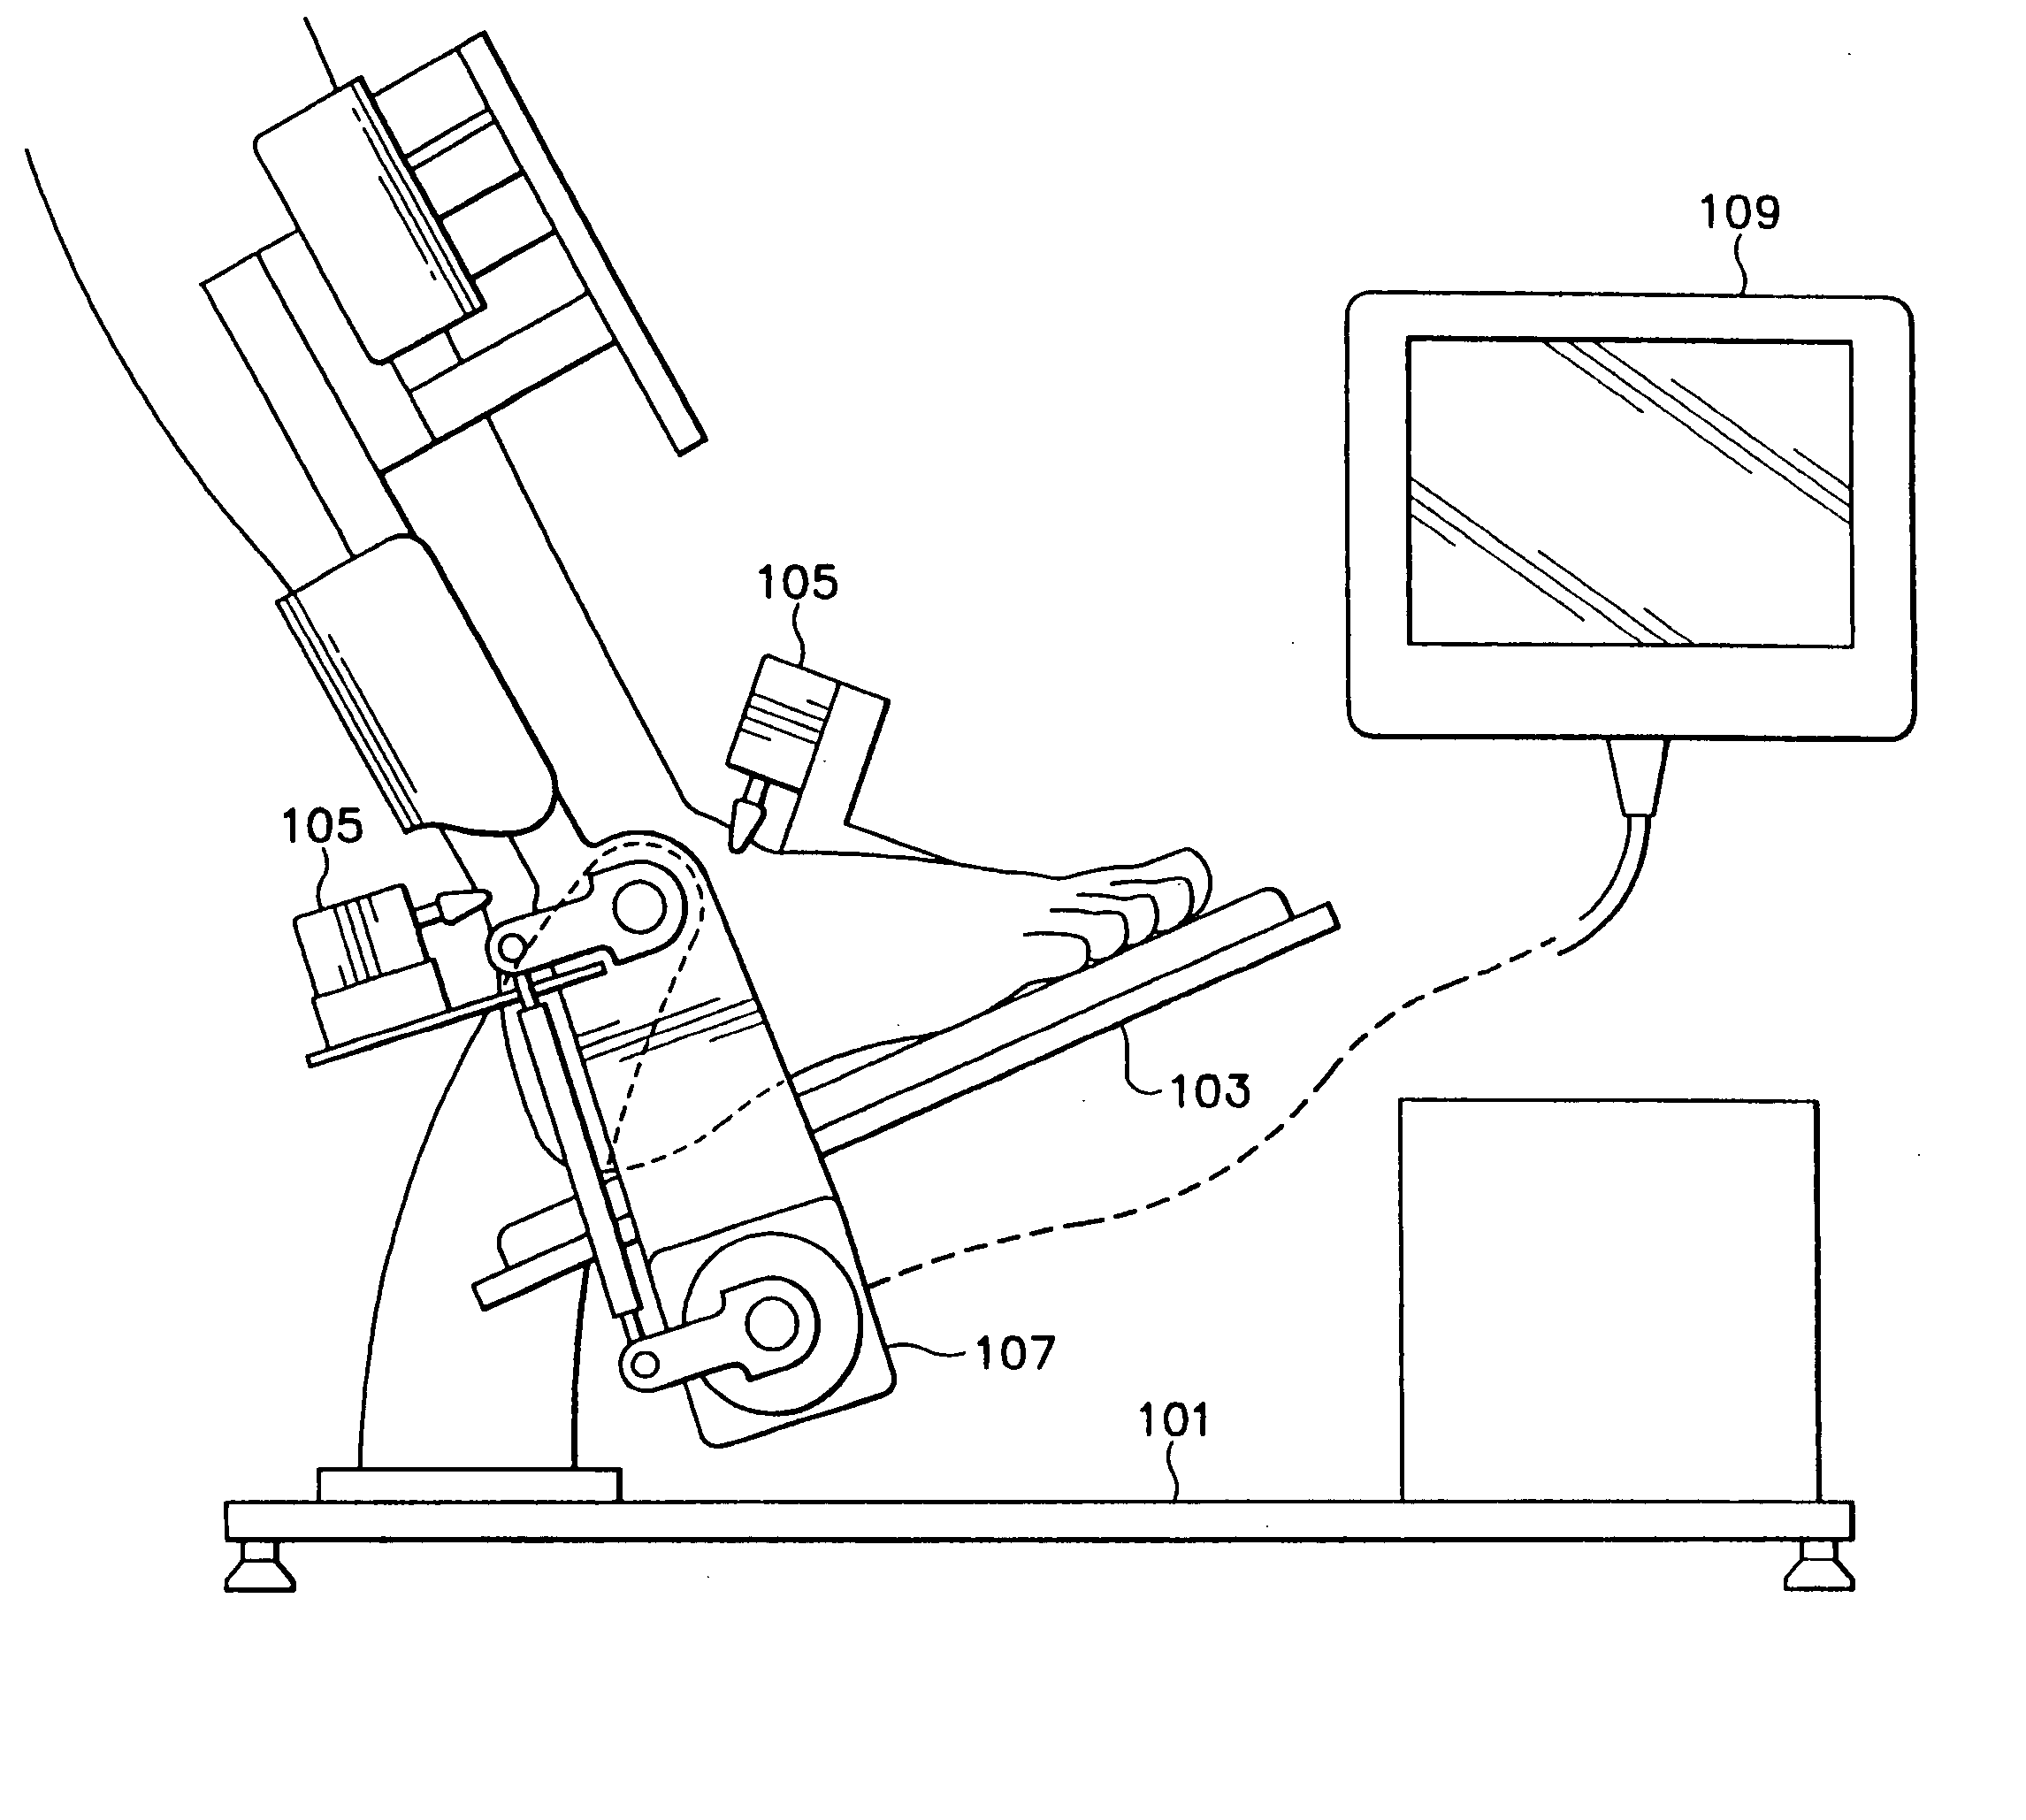 Device for rehabilitation of individuals experiencing loss of skeletal joint motor control